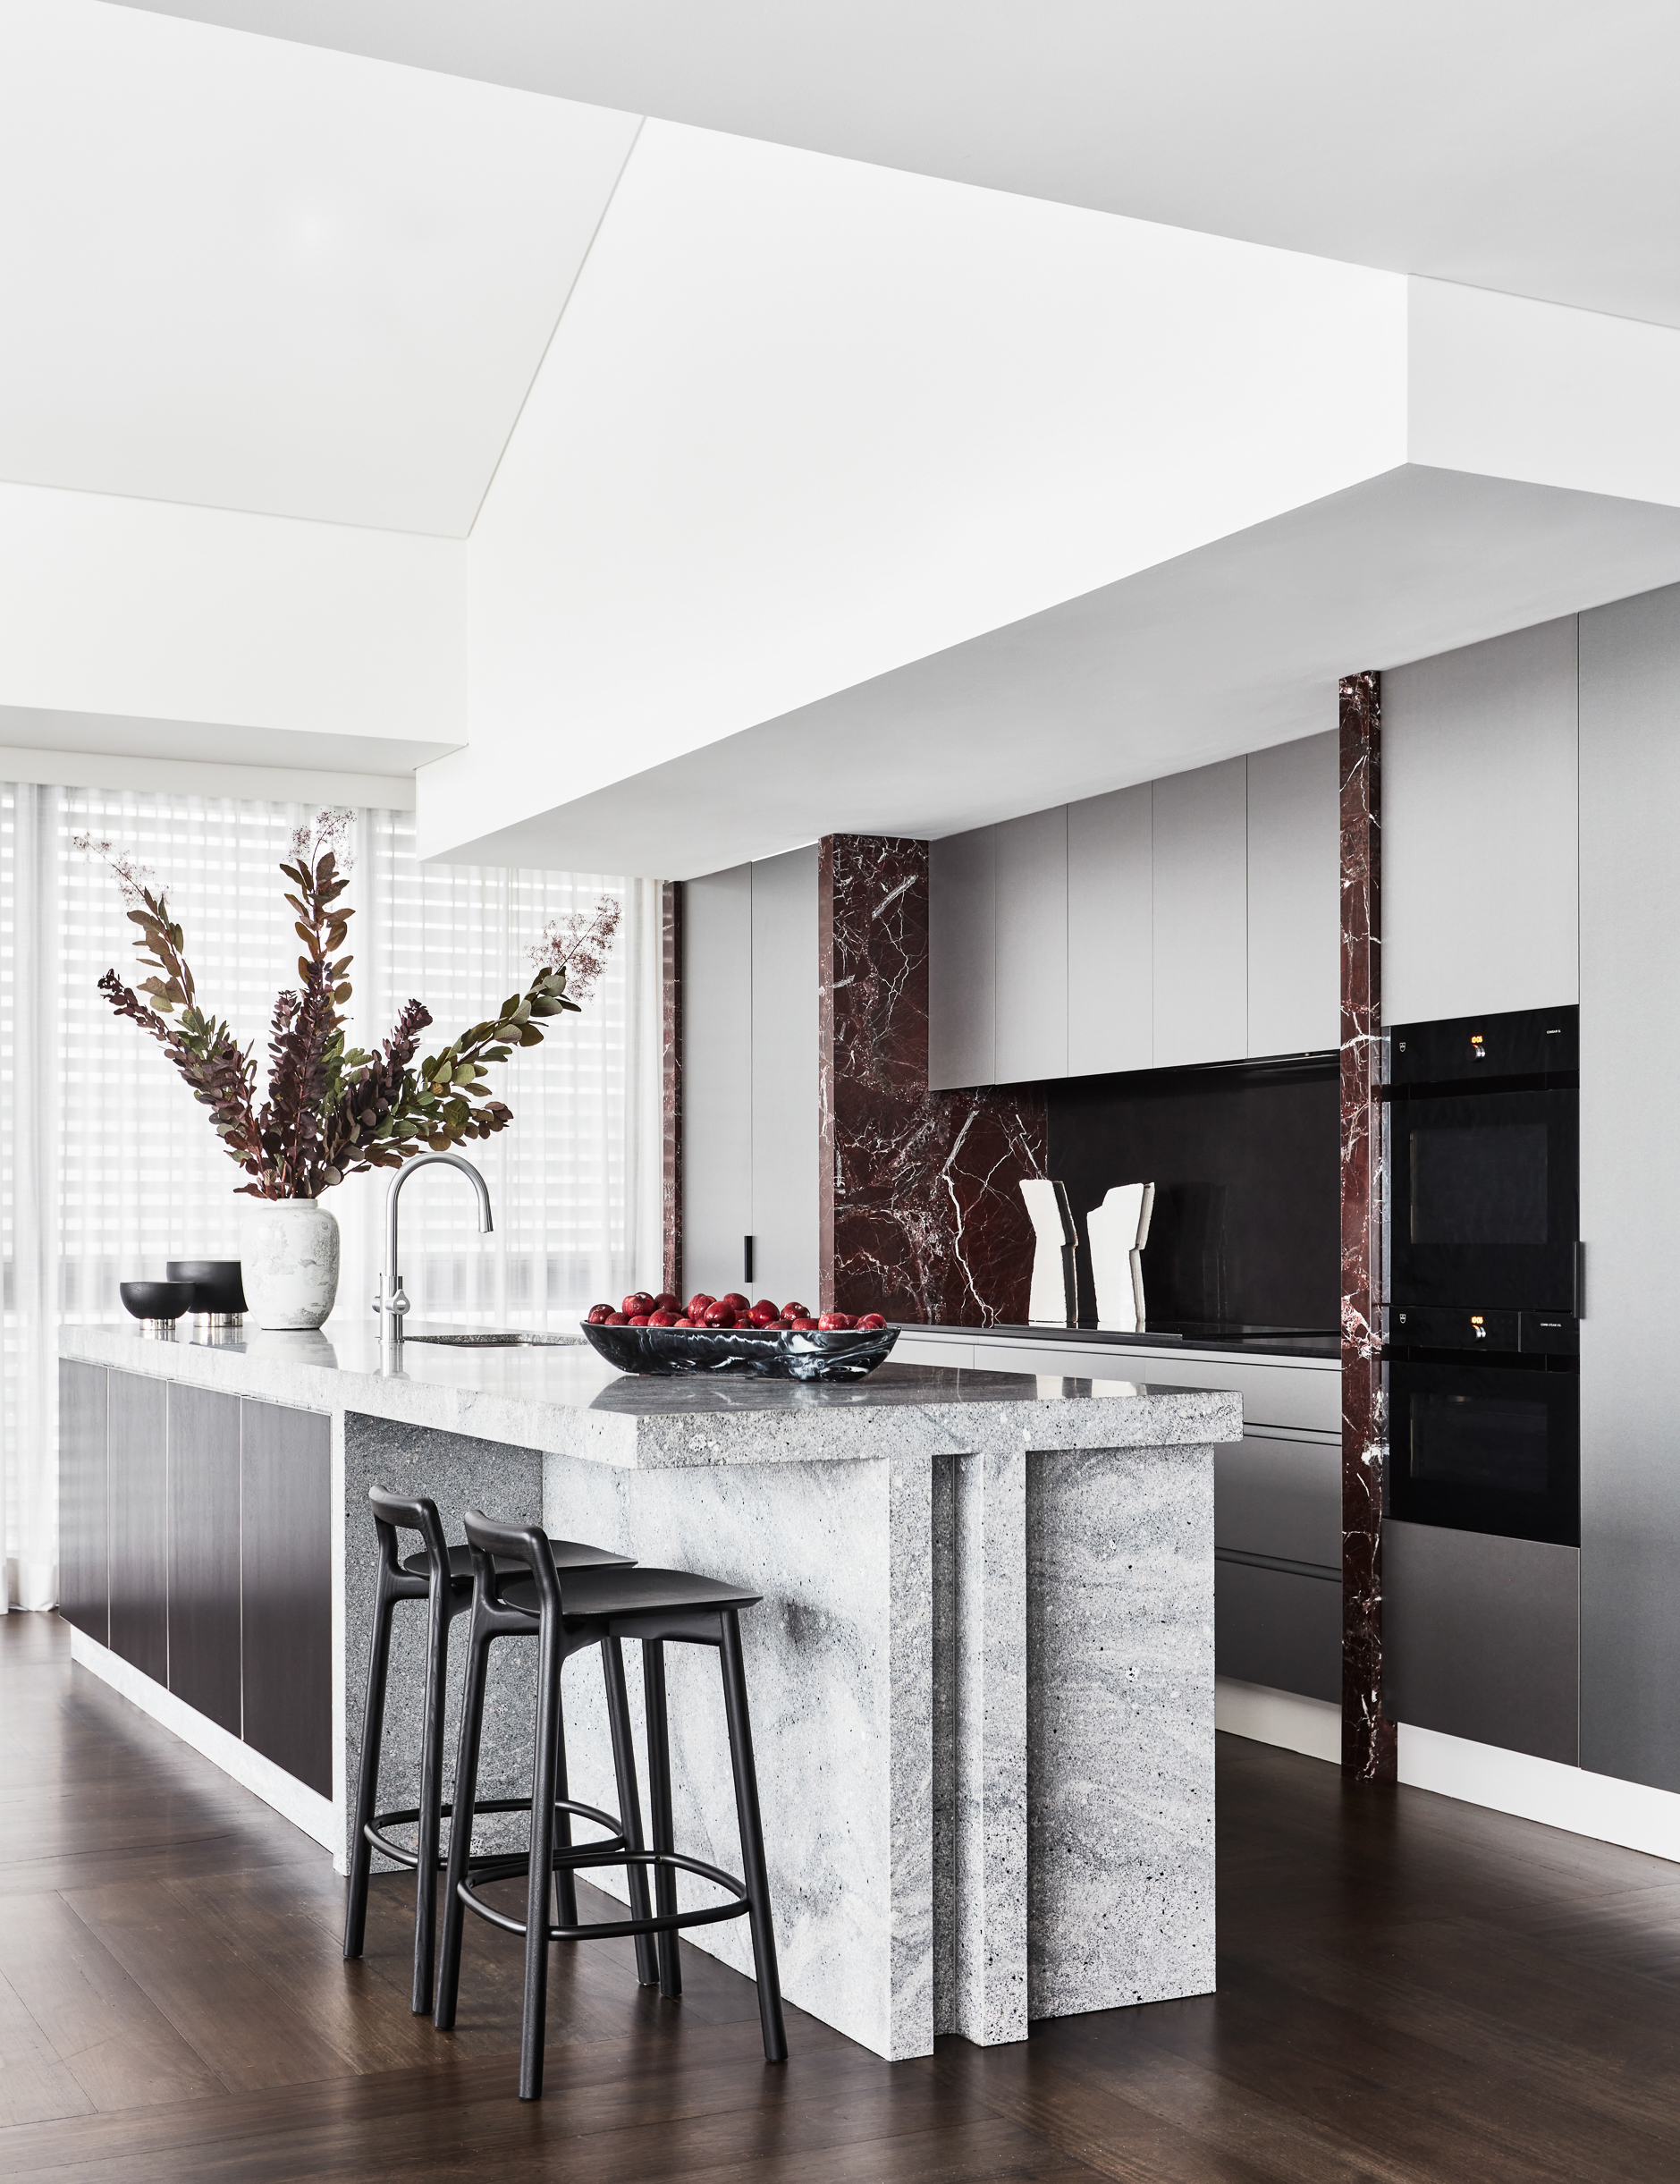 Modern kitchen renovation with stone island and timber parquetry floor by Sydney interior designers, Brendan Wong Design